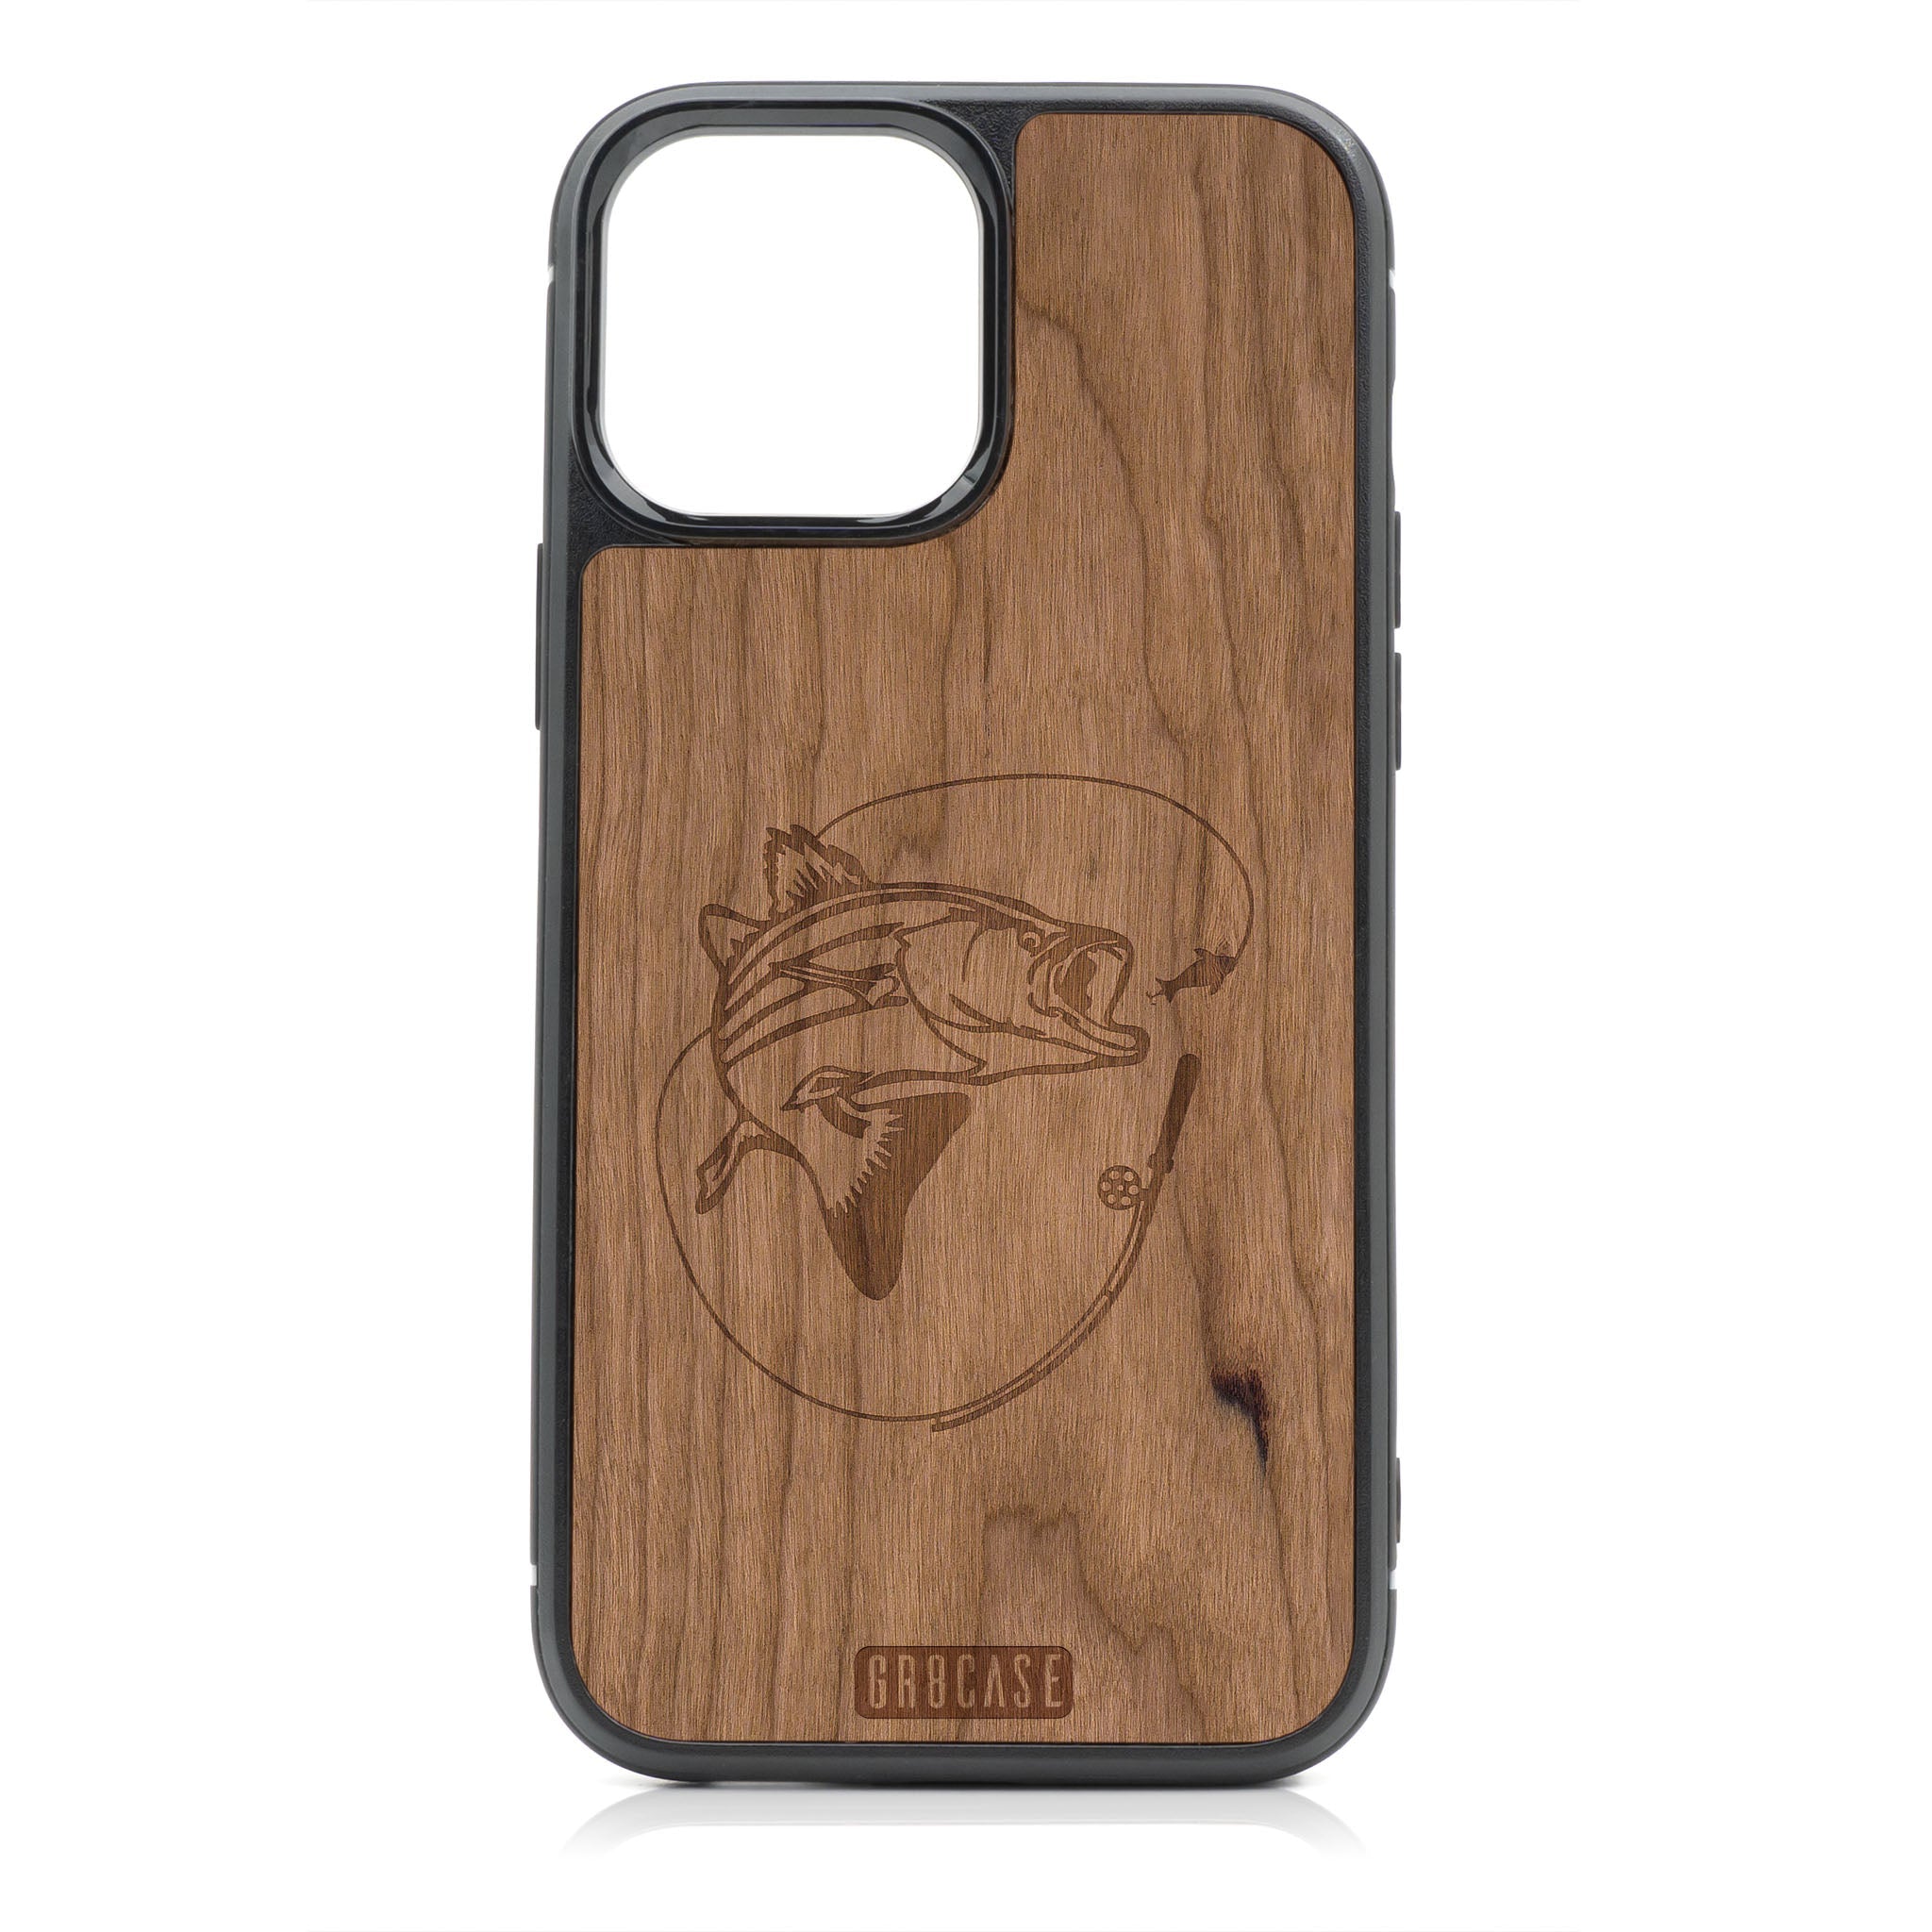 Fish and Reel Design Wood Case For iPhone 14 Pro Max